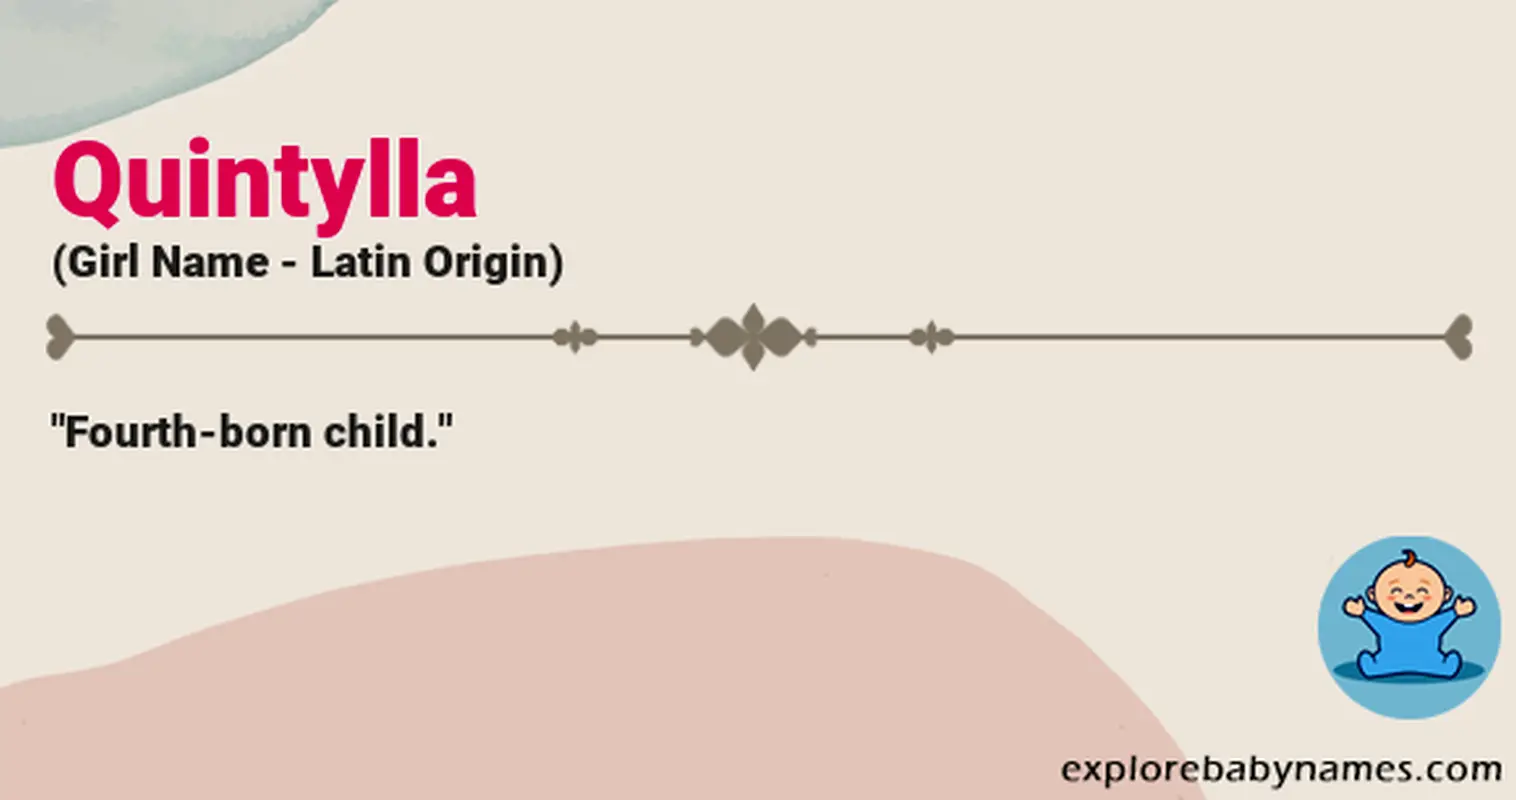 Meaning of Quintylla